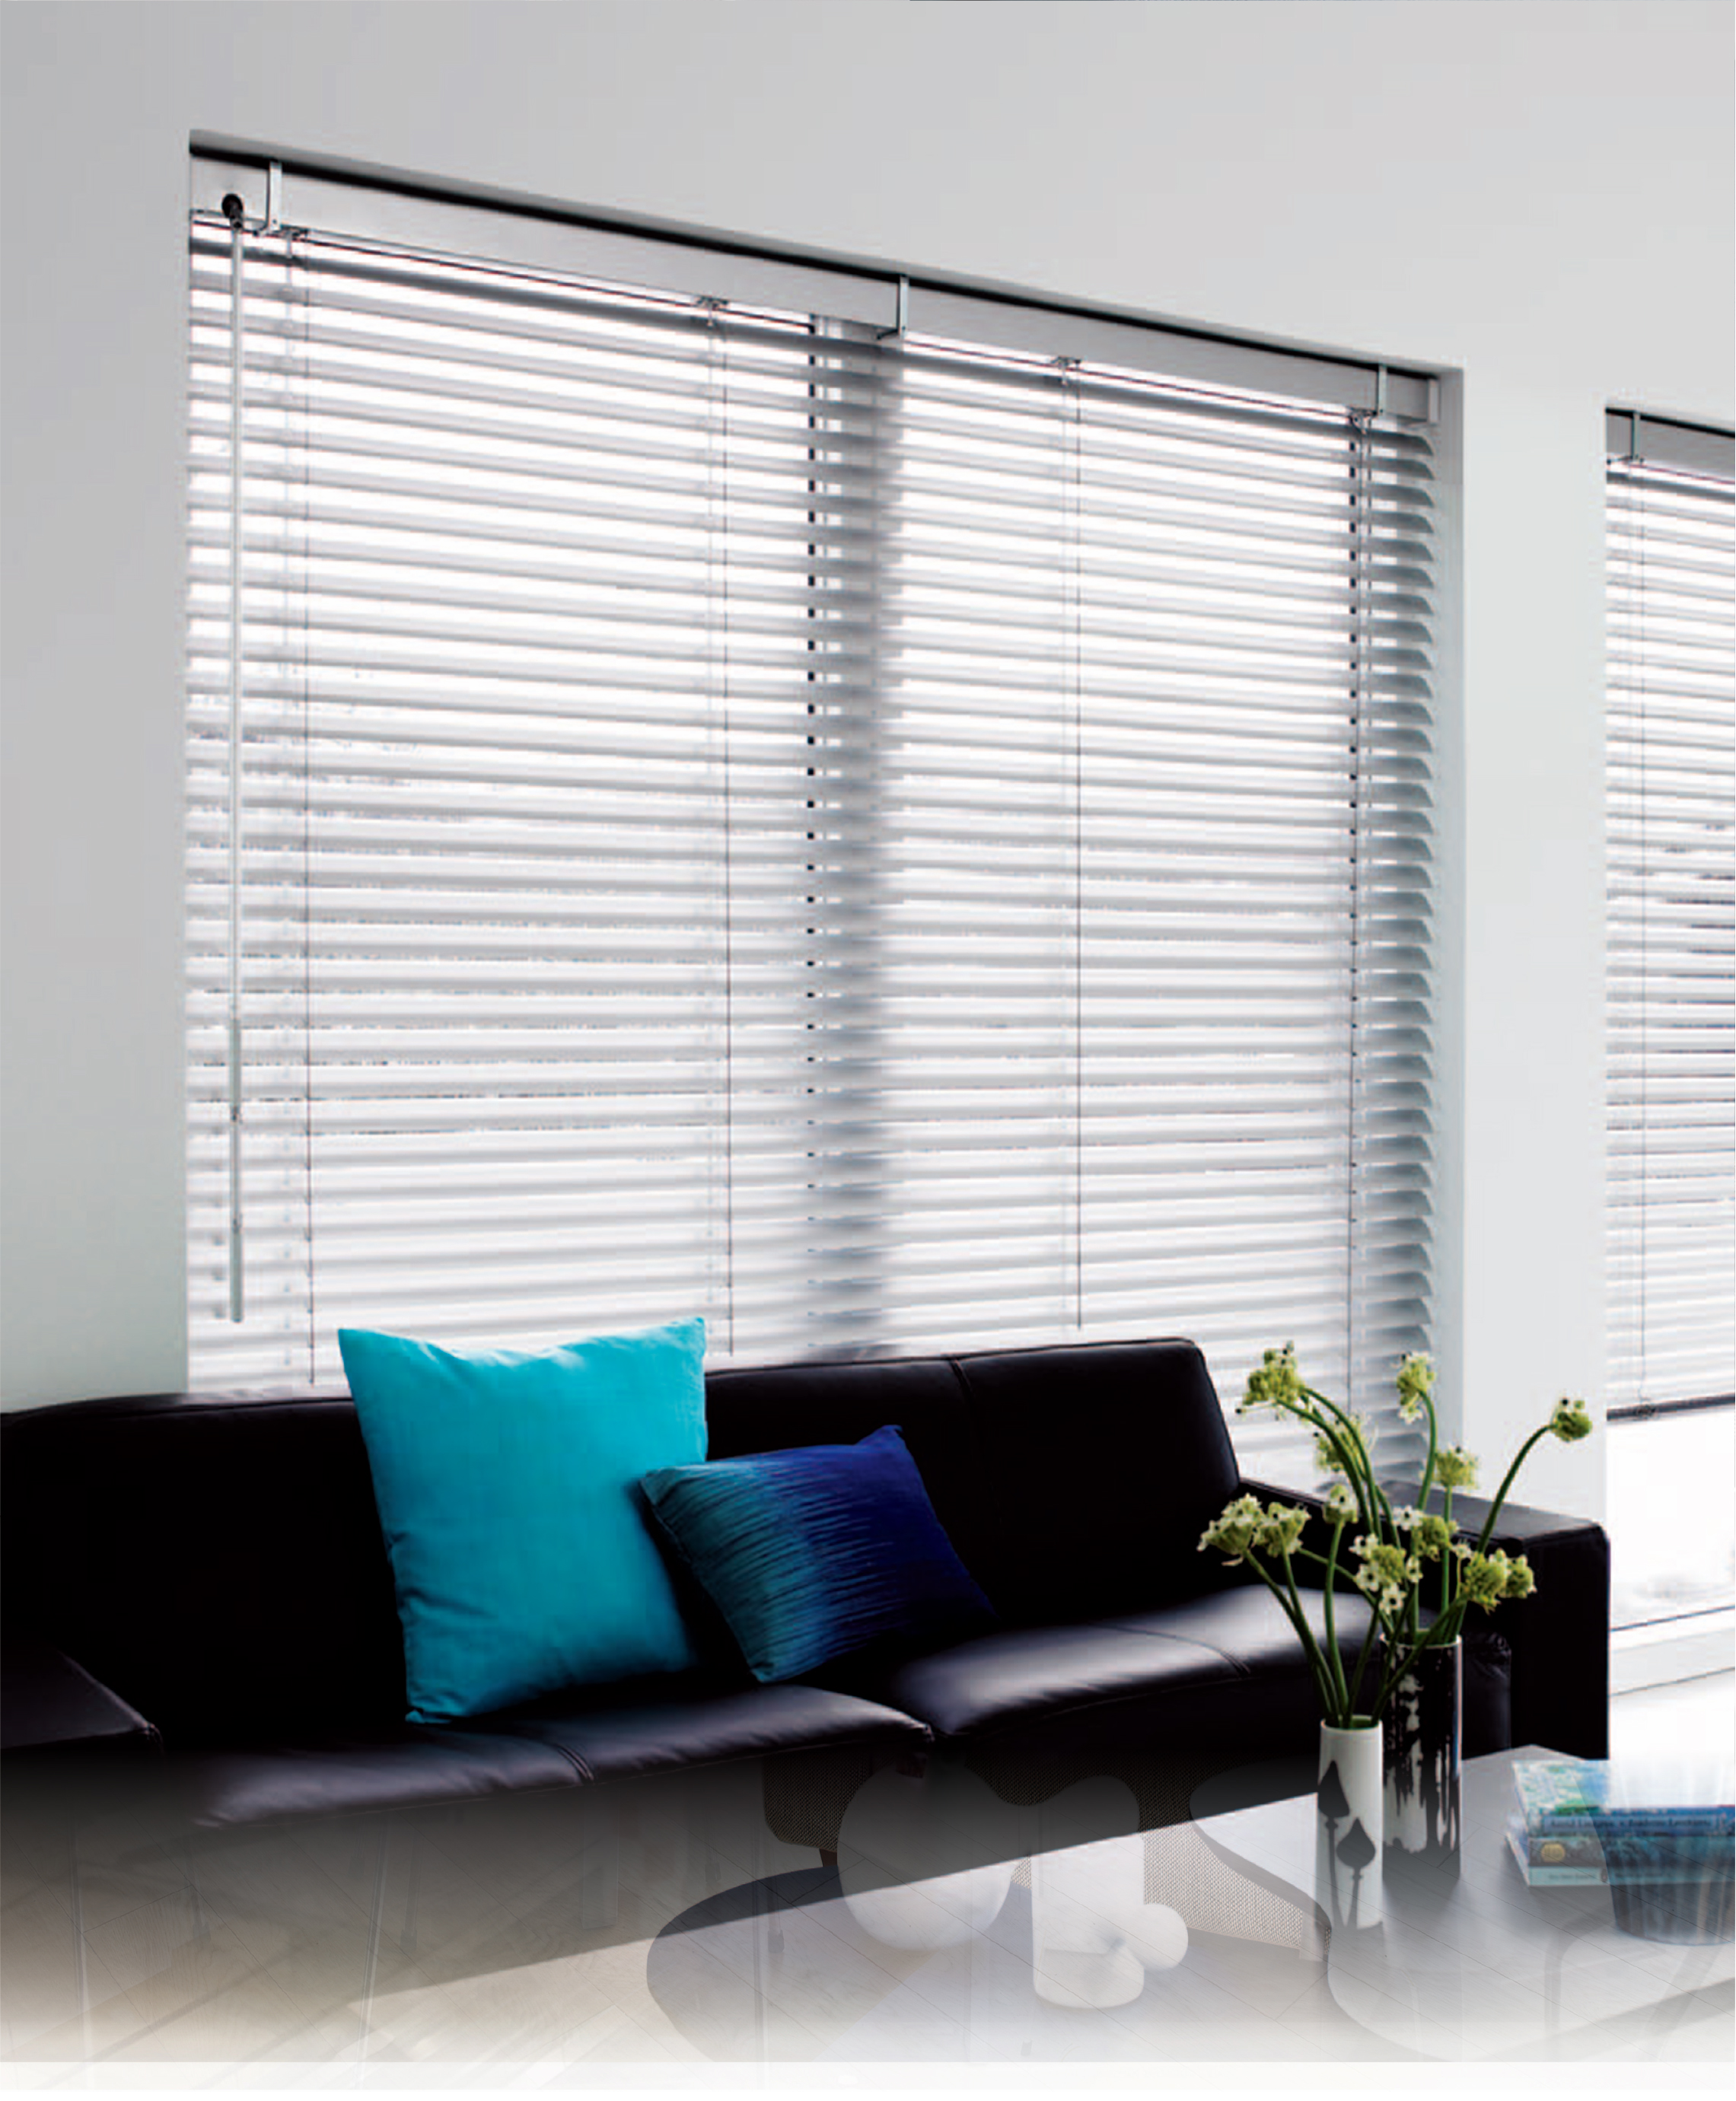 What are the benefits of choosing roller blinds as your window treatment?